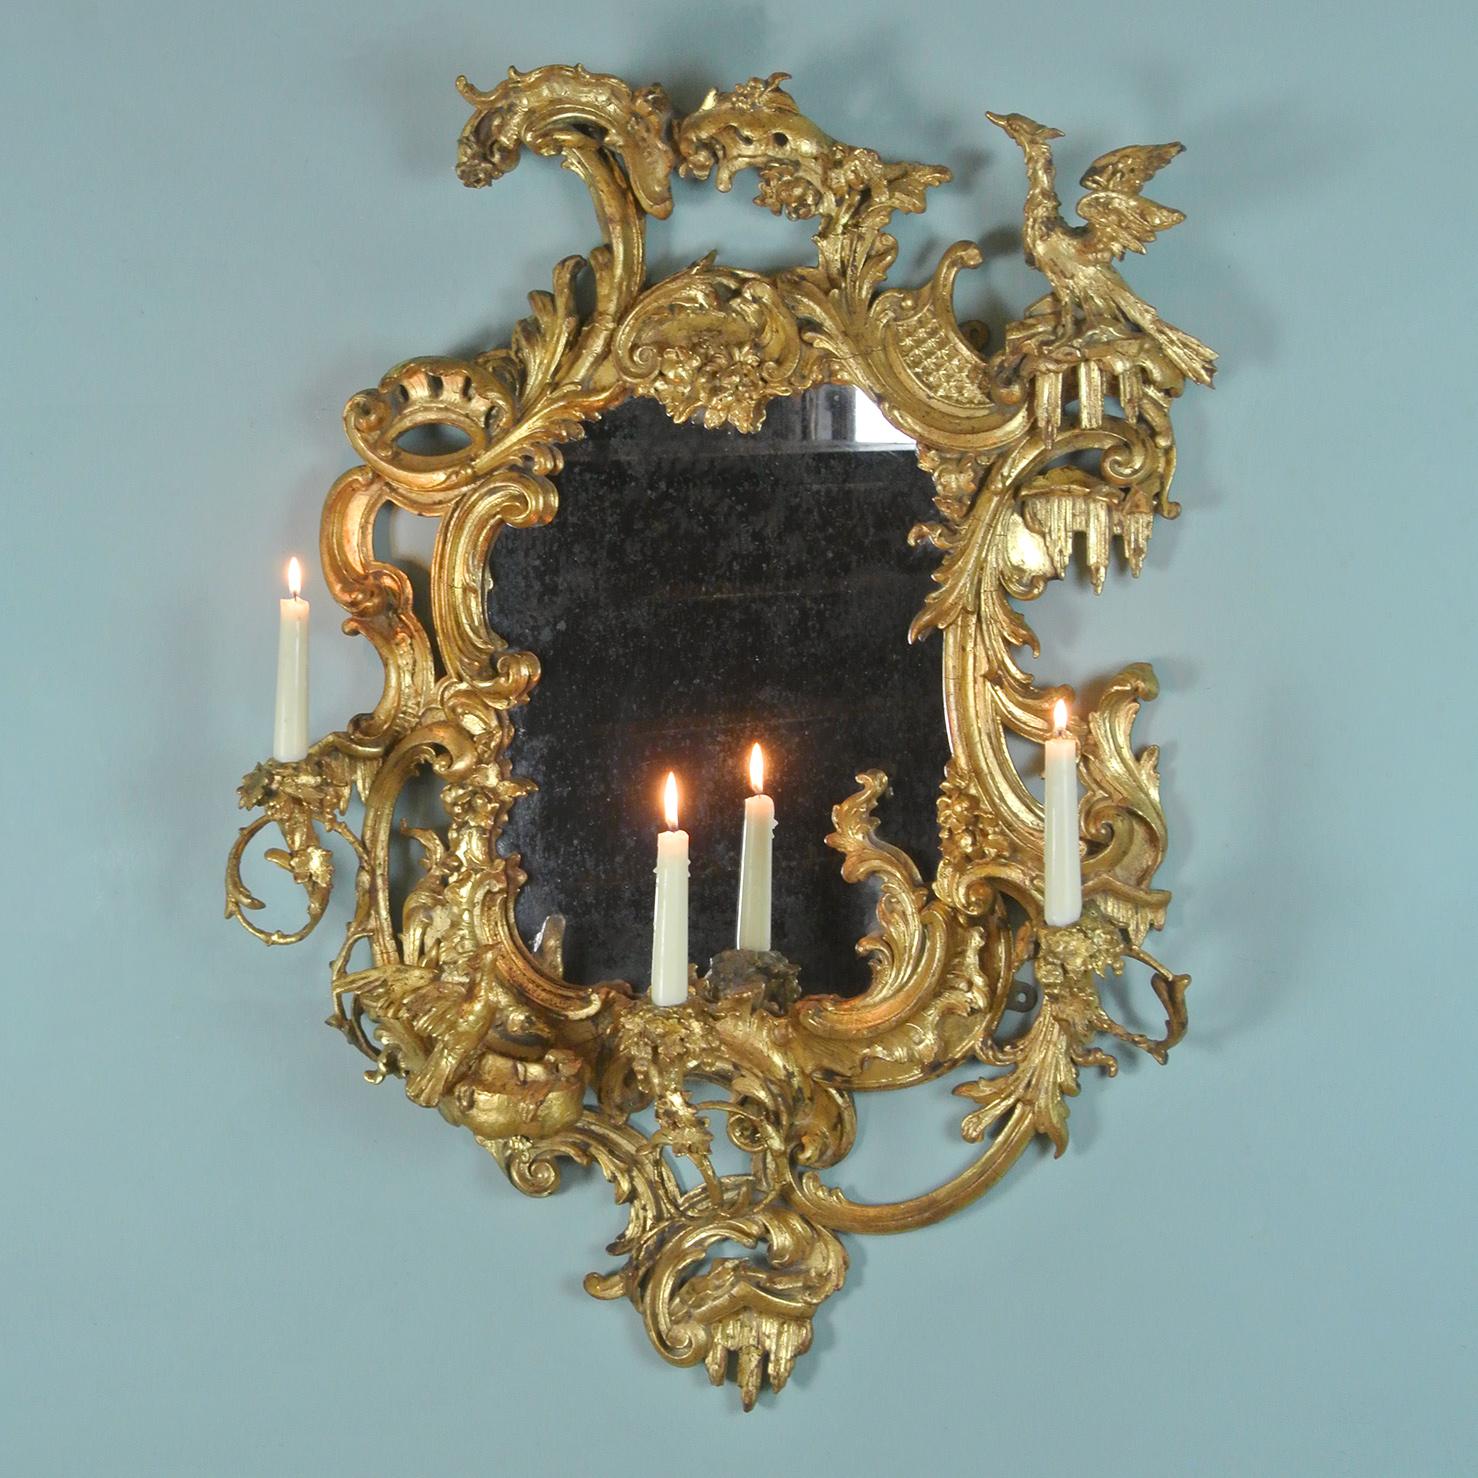 An extraordinary Mid-18th Century three branch girondole mirror with original gilding in the manner of Thomas Chippendale and combining both Gothic and chinoiserie elements to create a ‘fantasy’ landscape. 

The frame superbly carved and a